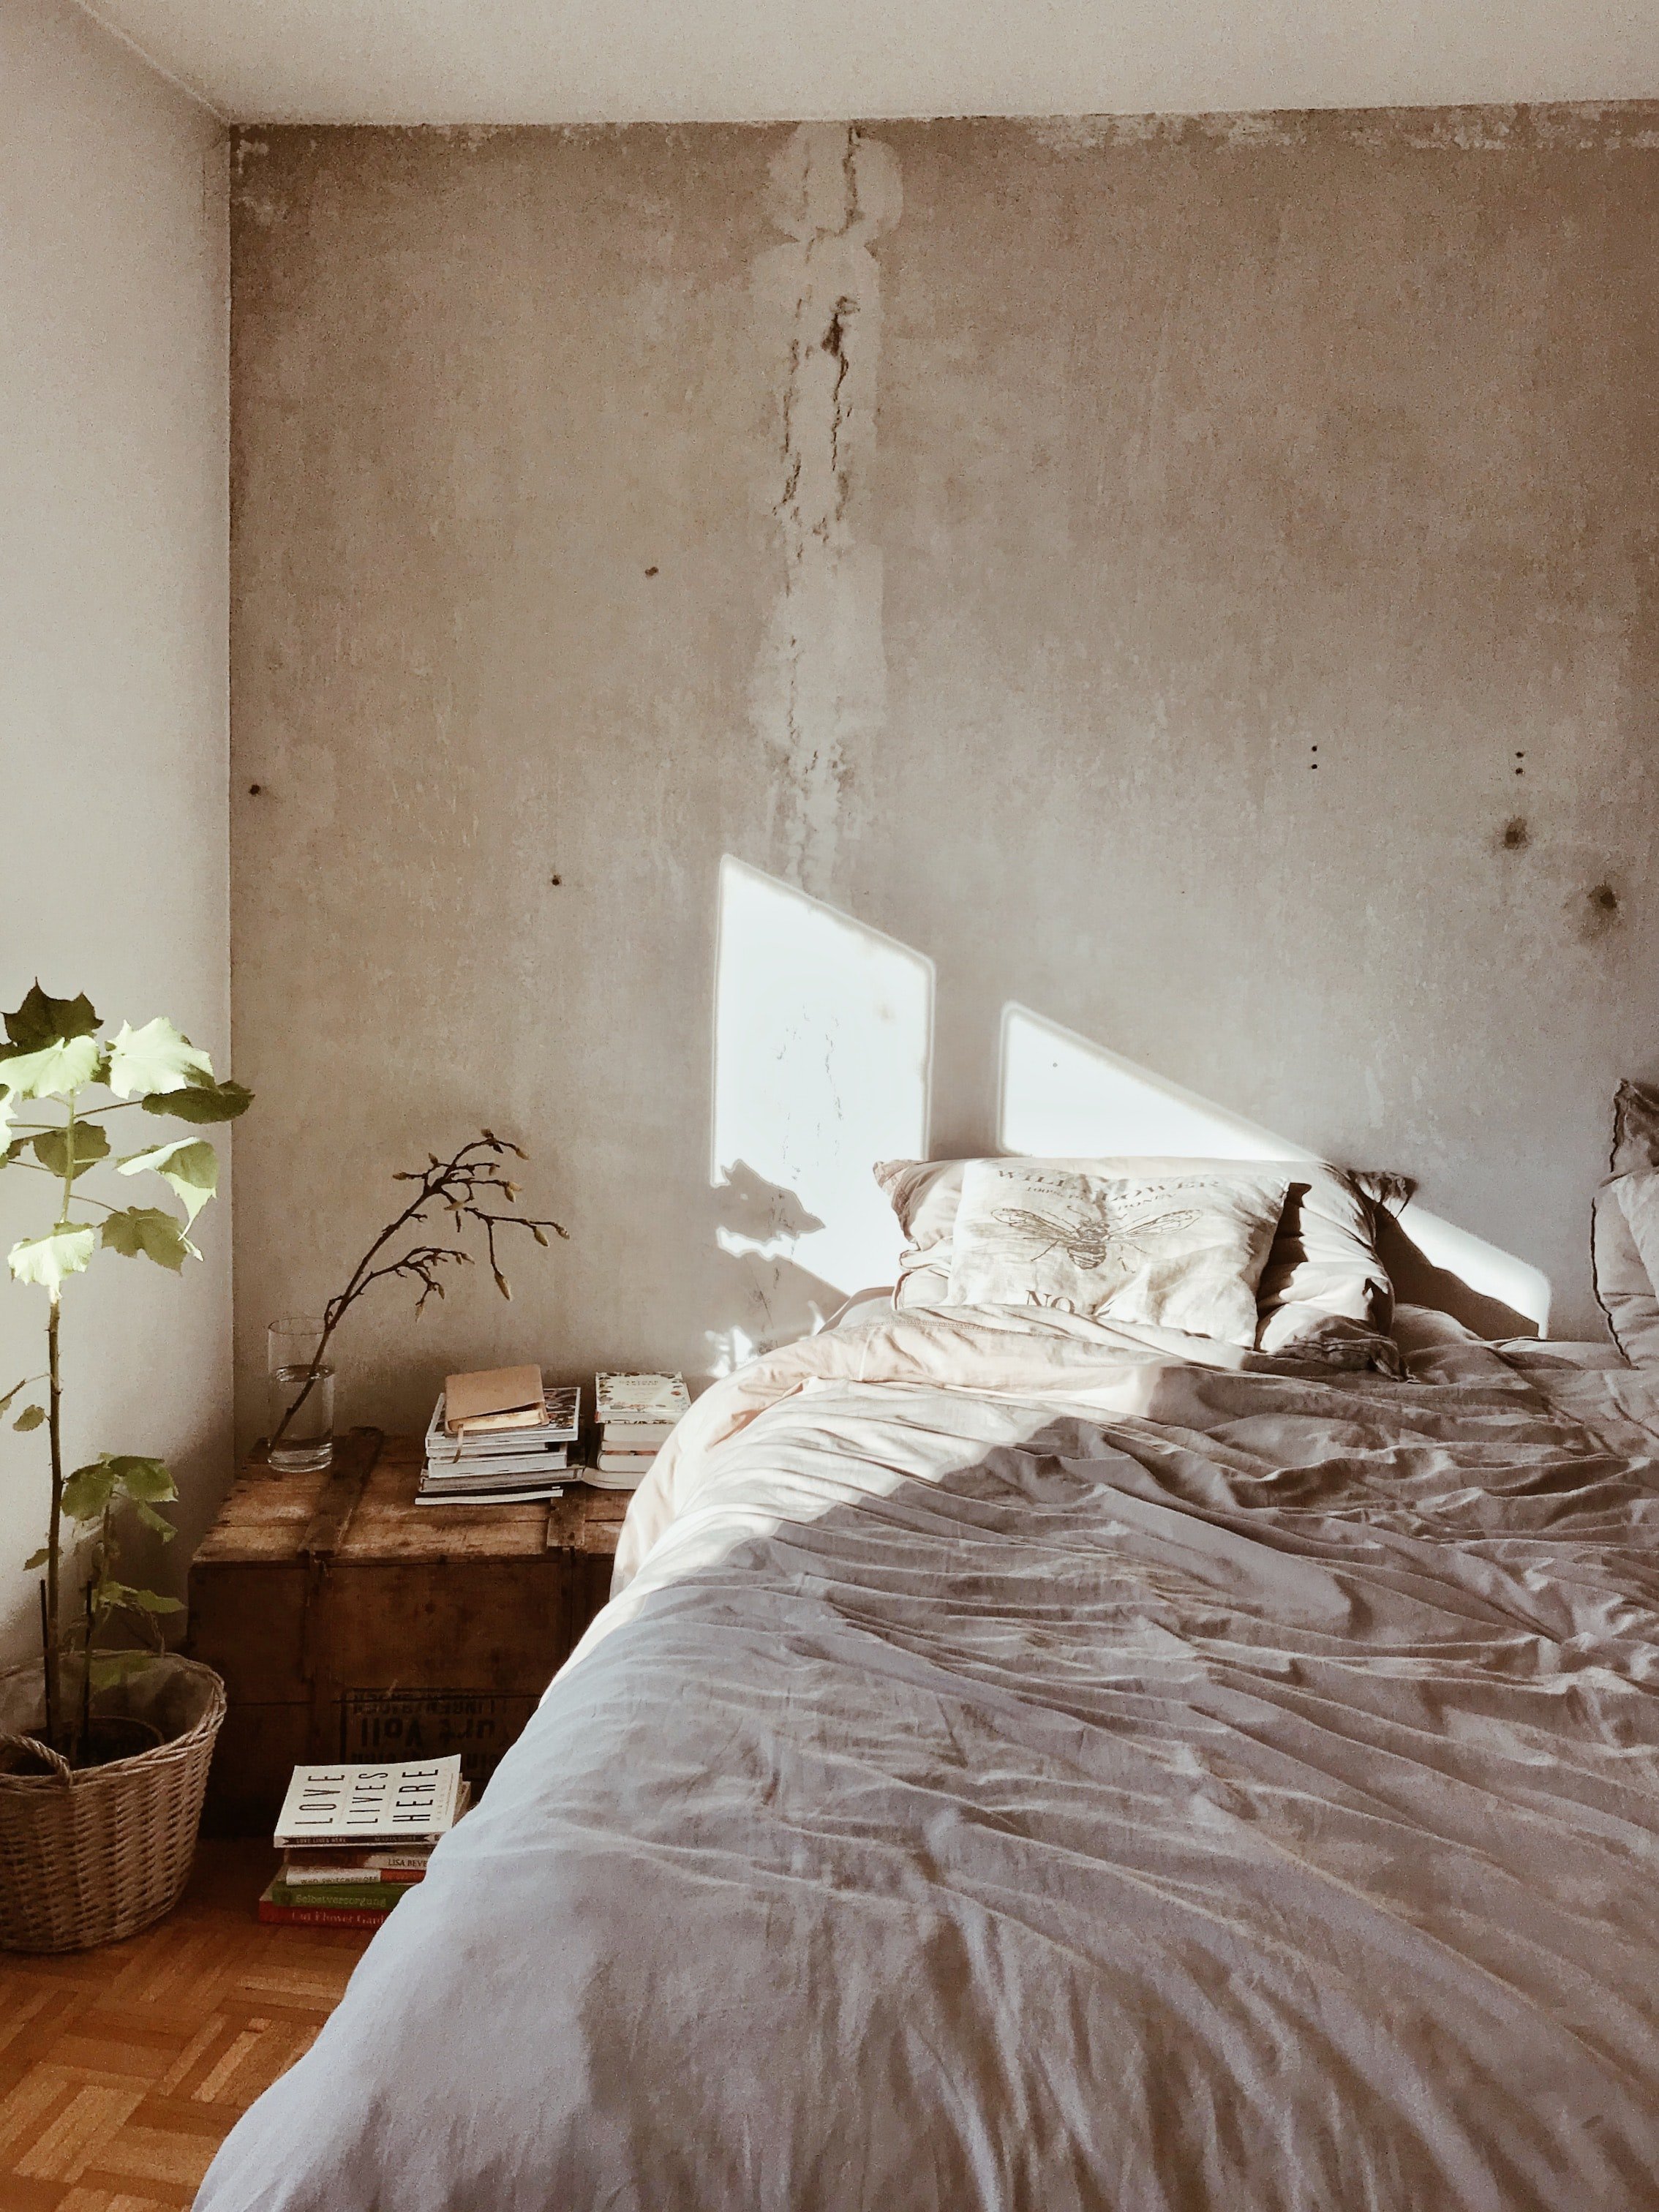 image of messy bed with bare plaster wall behind